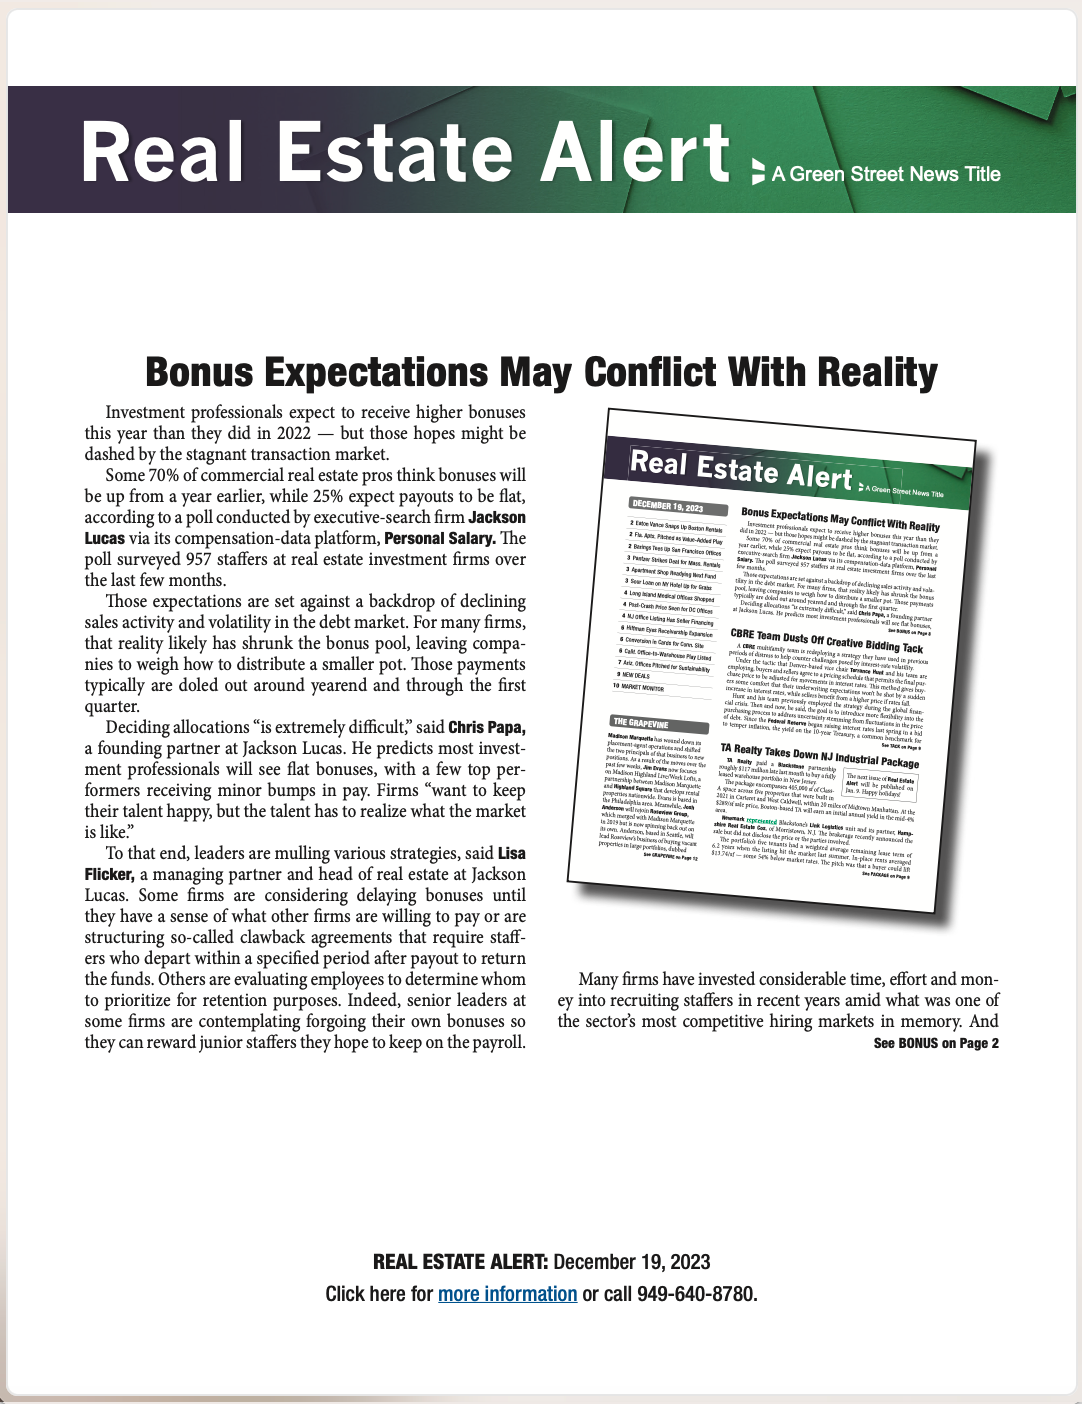 Bonus Expectations May Conflict With Reality